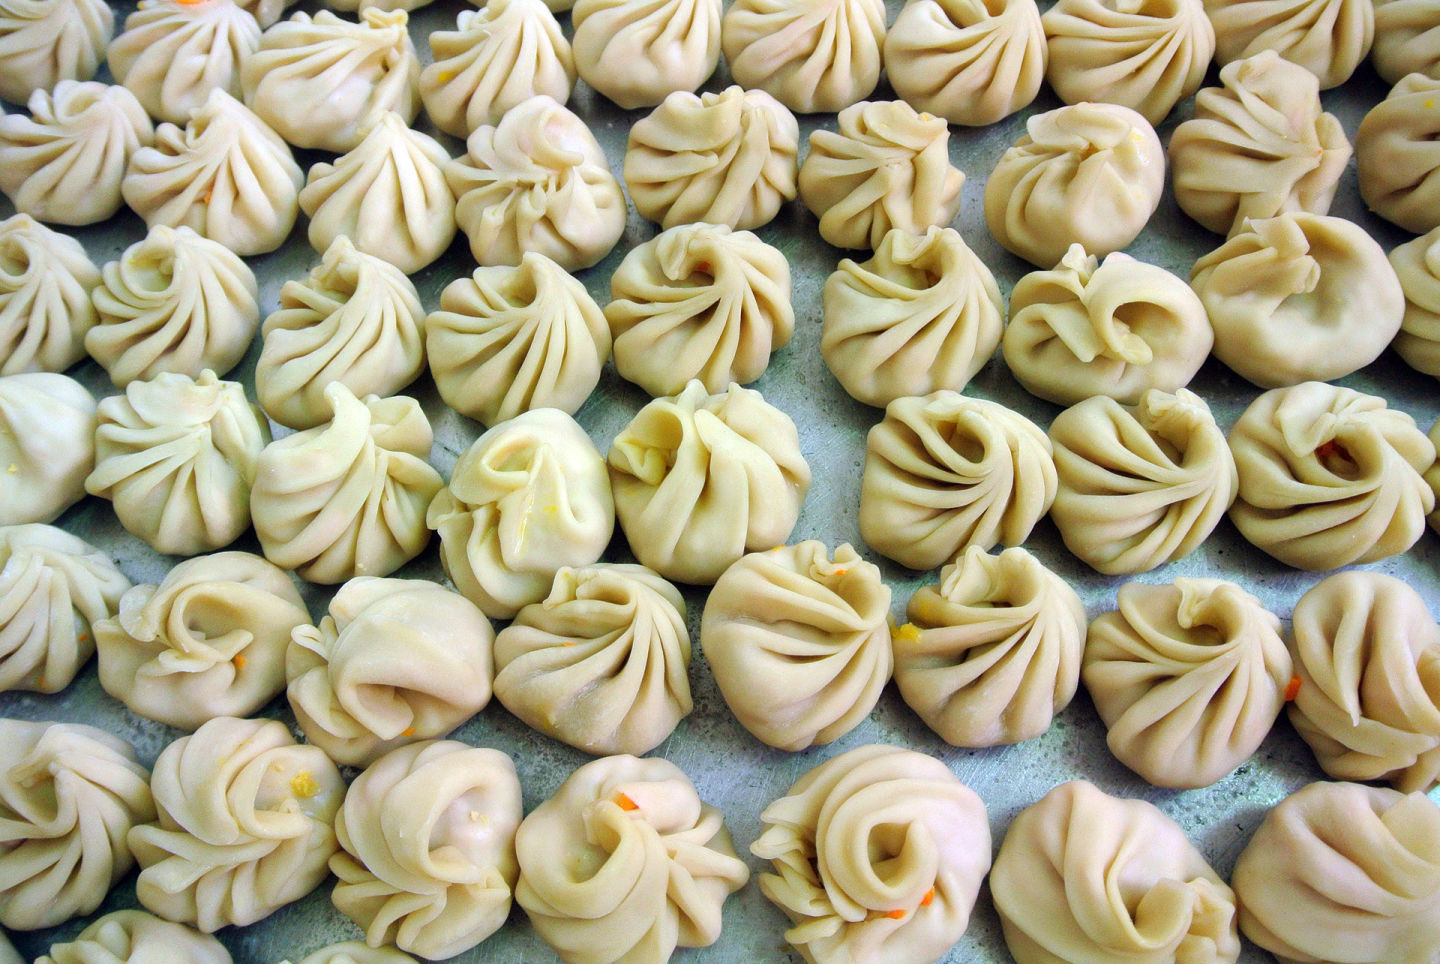 Momos ready for steaming at Bini's Kitchen Renée Alexander